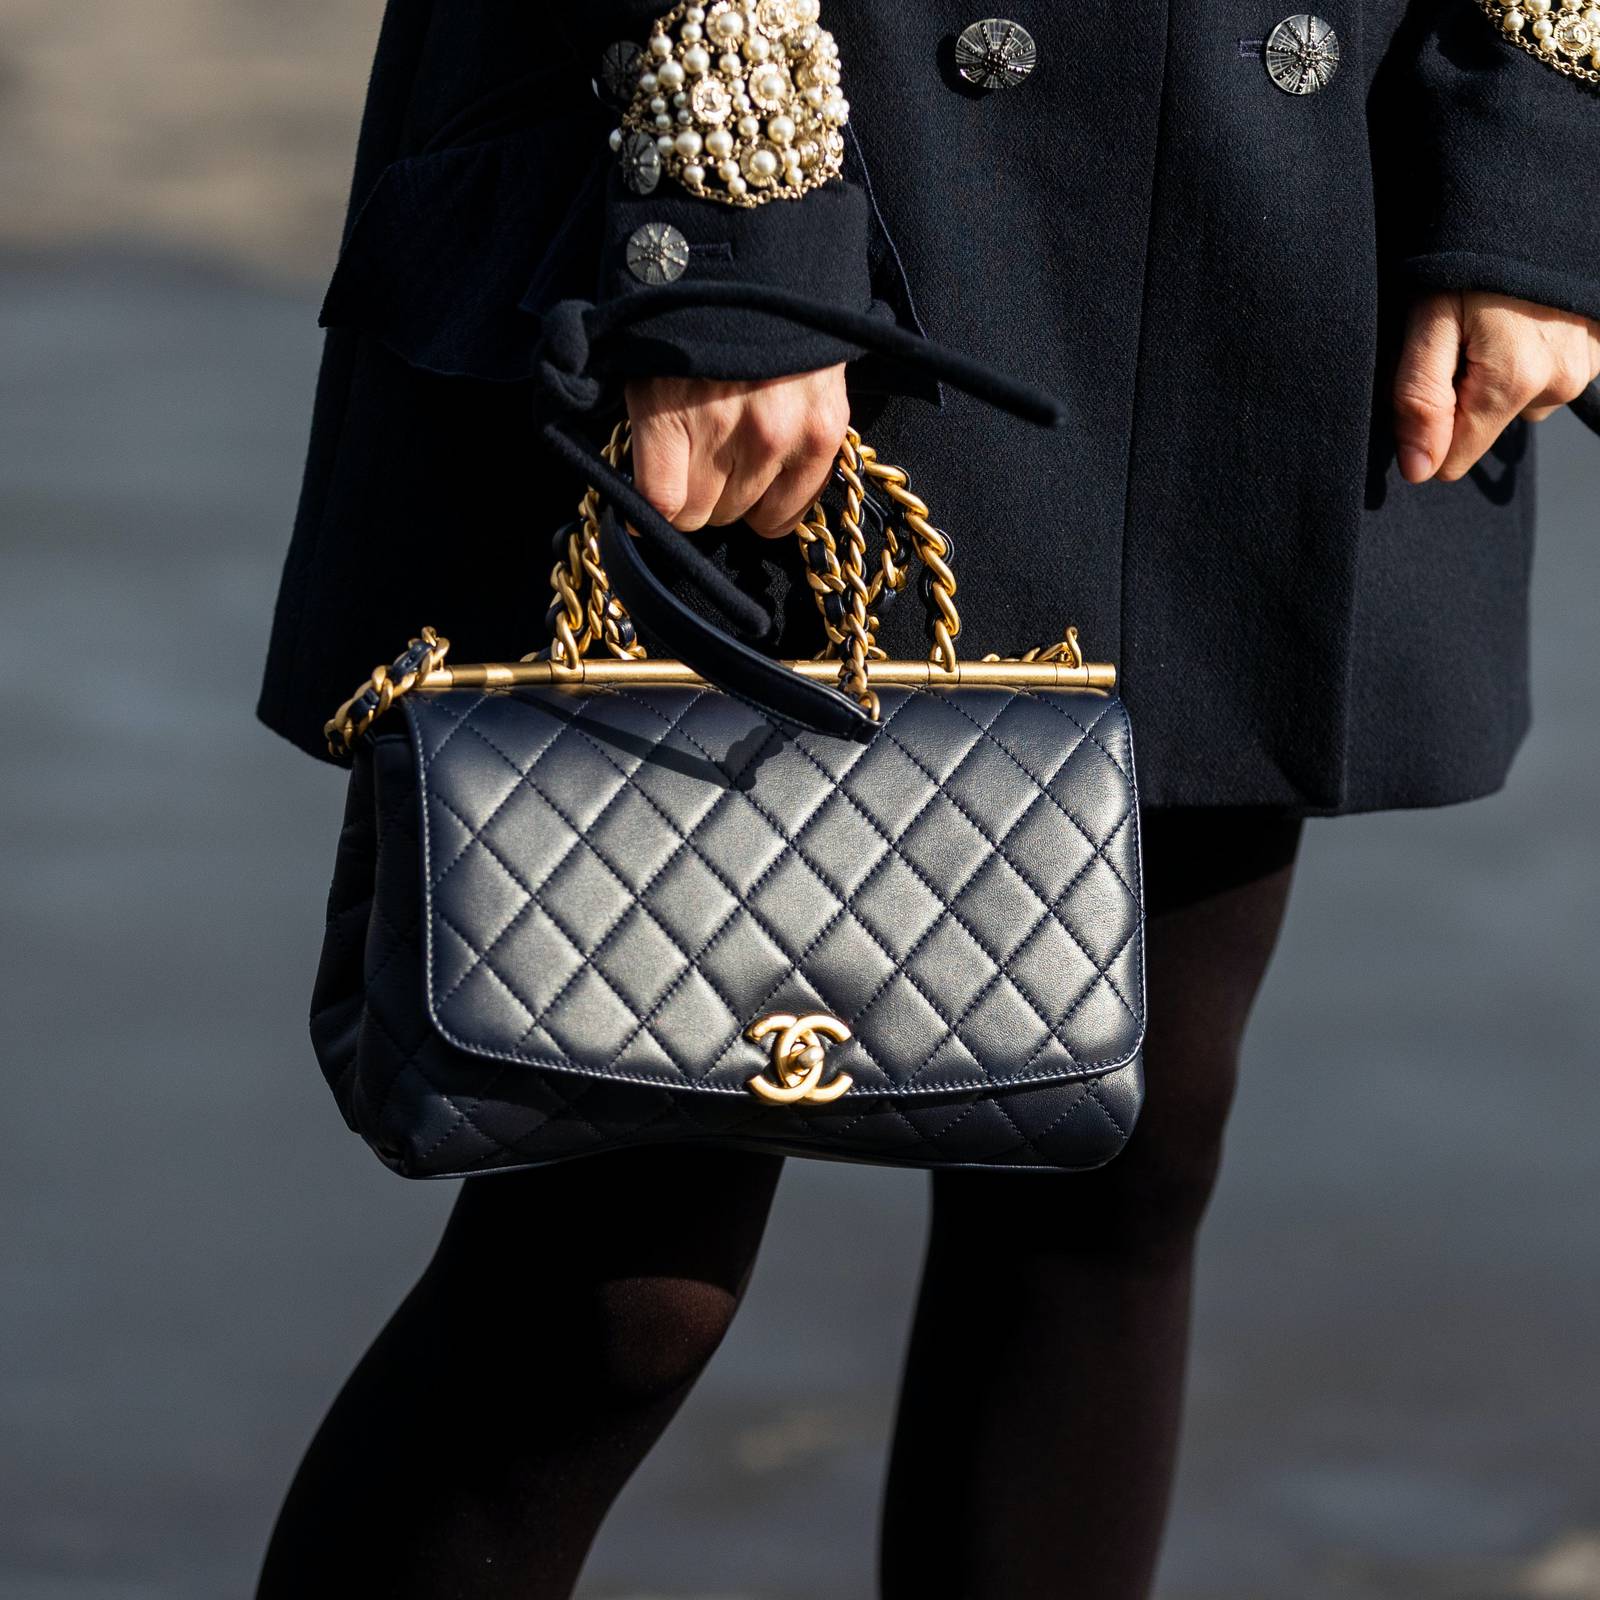 Chanel Hikes Handbag Prices in Run-up to Christmas